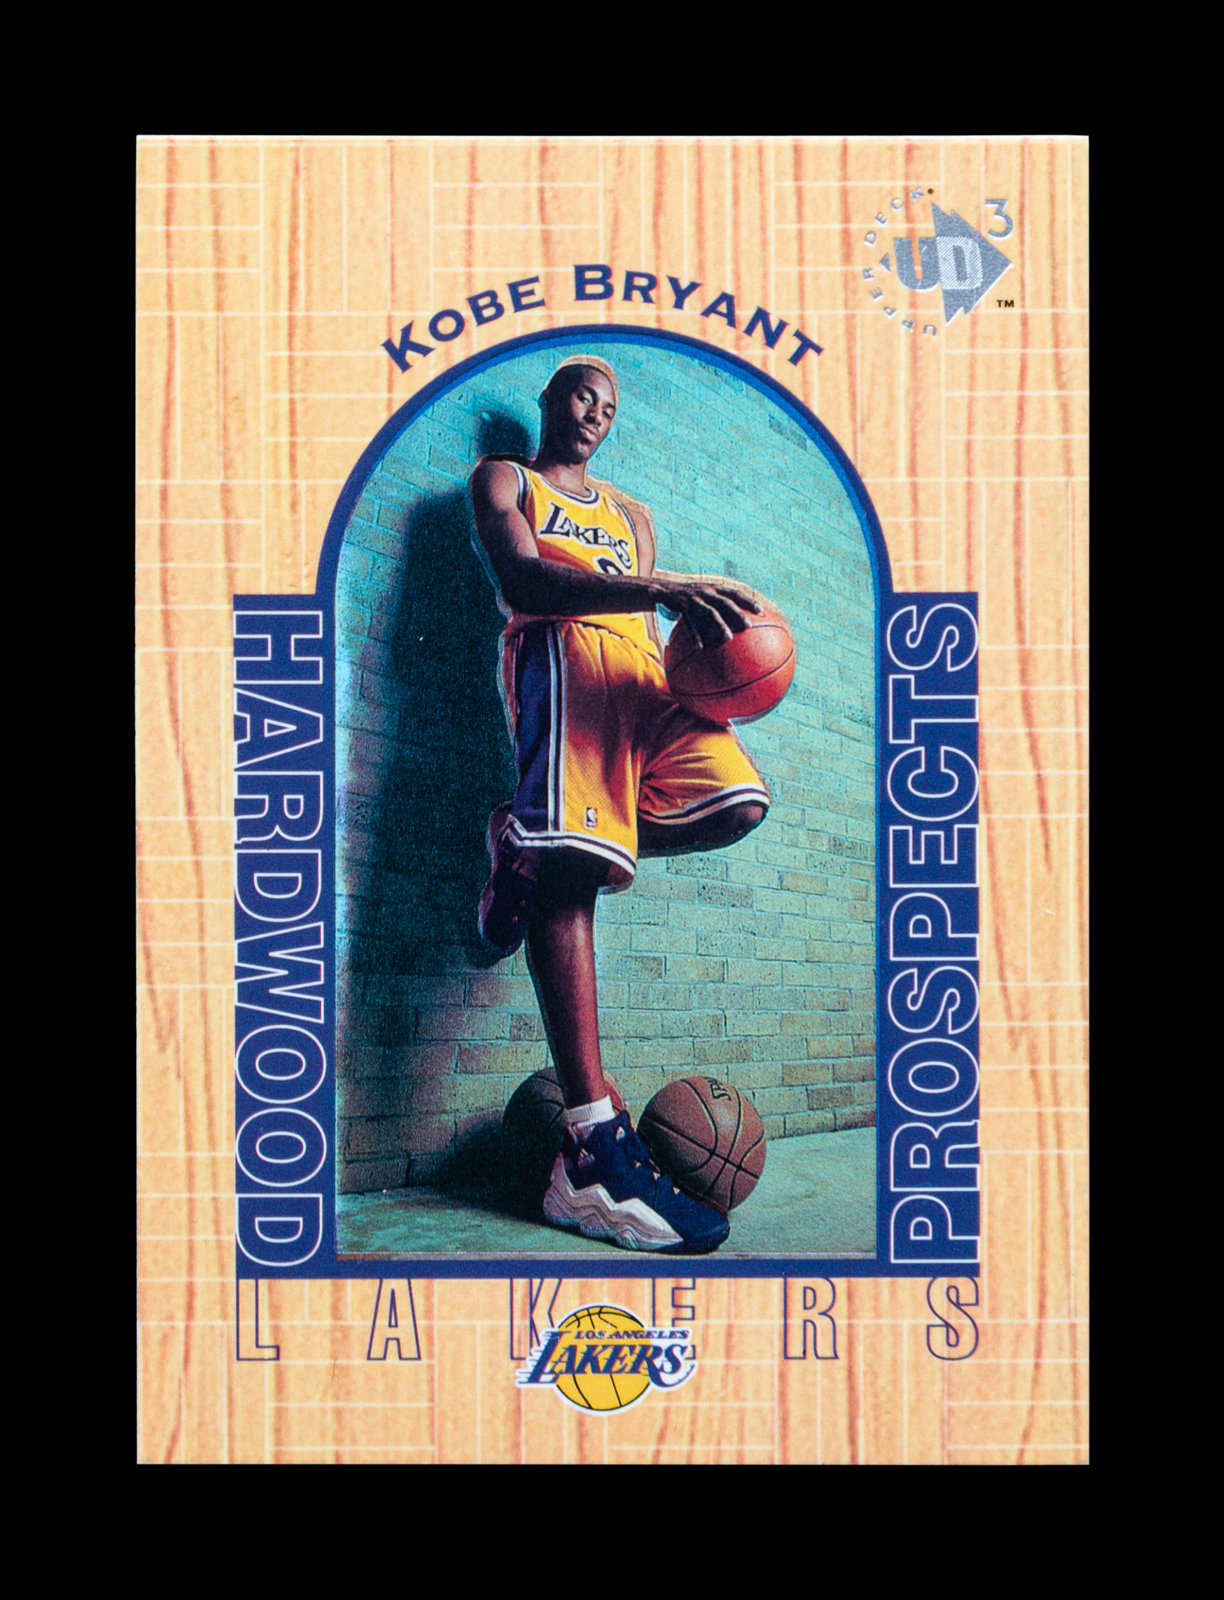 Hindman Auctions & Private Sales  8.24: The Definitive Collection of Kobe  Bryant Rookie Cards